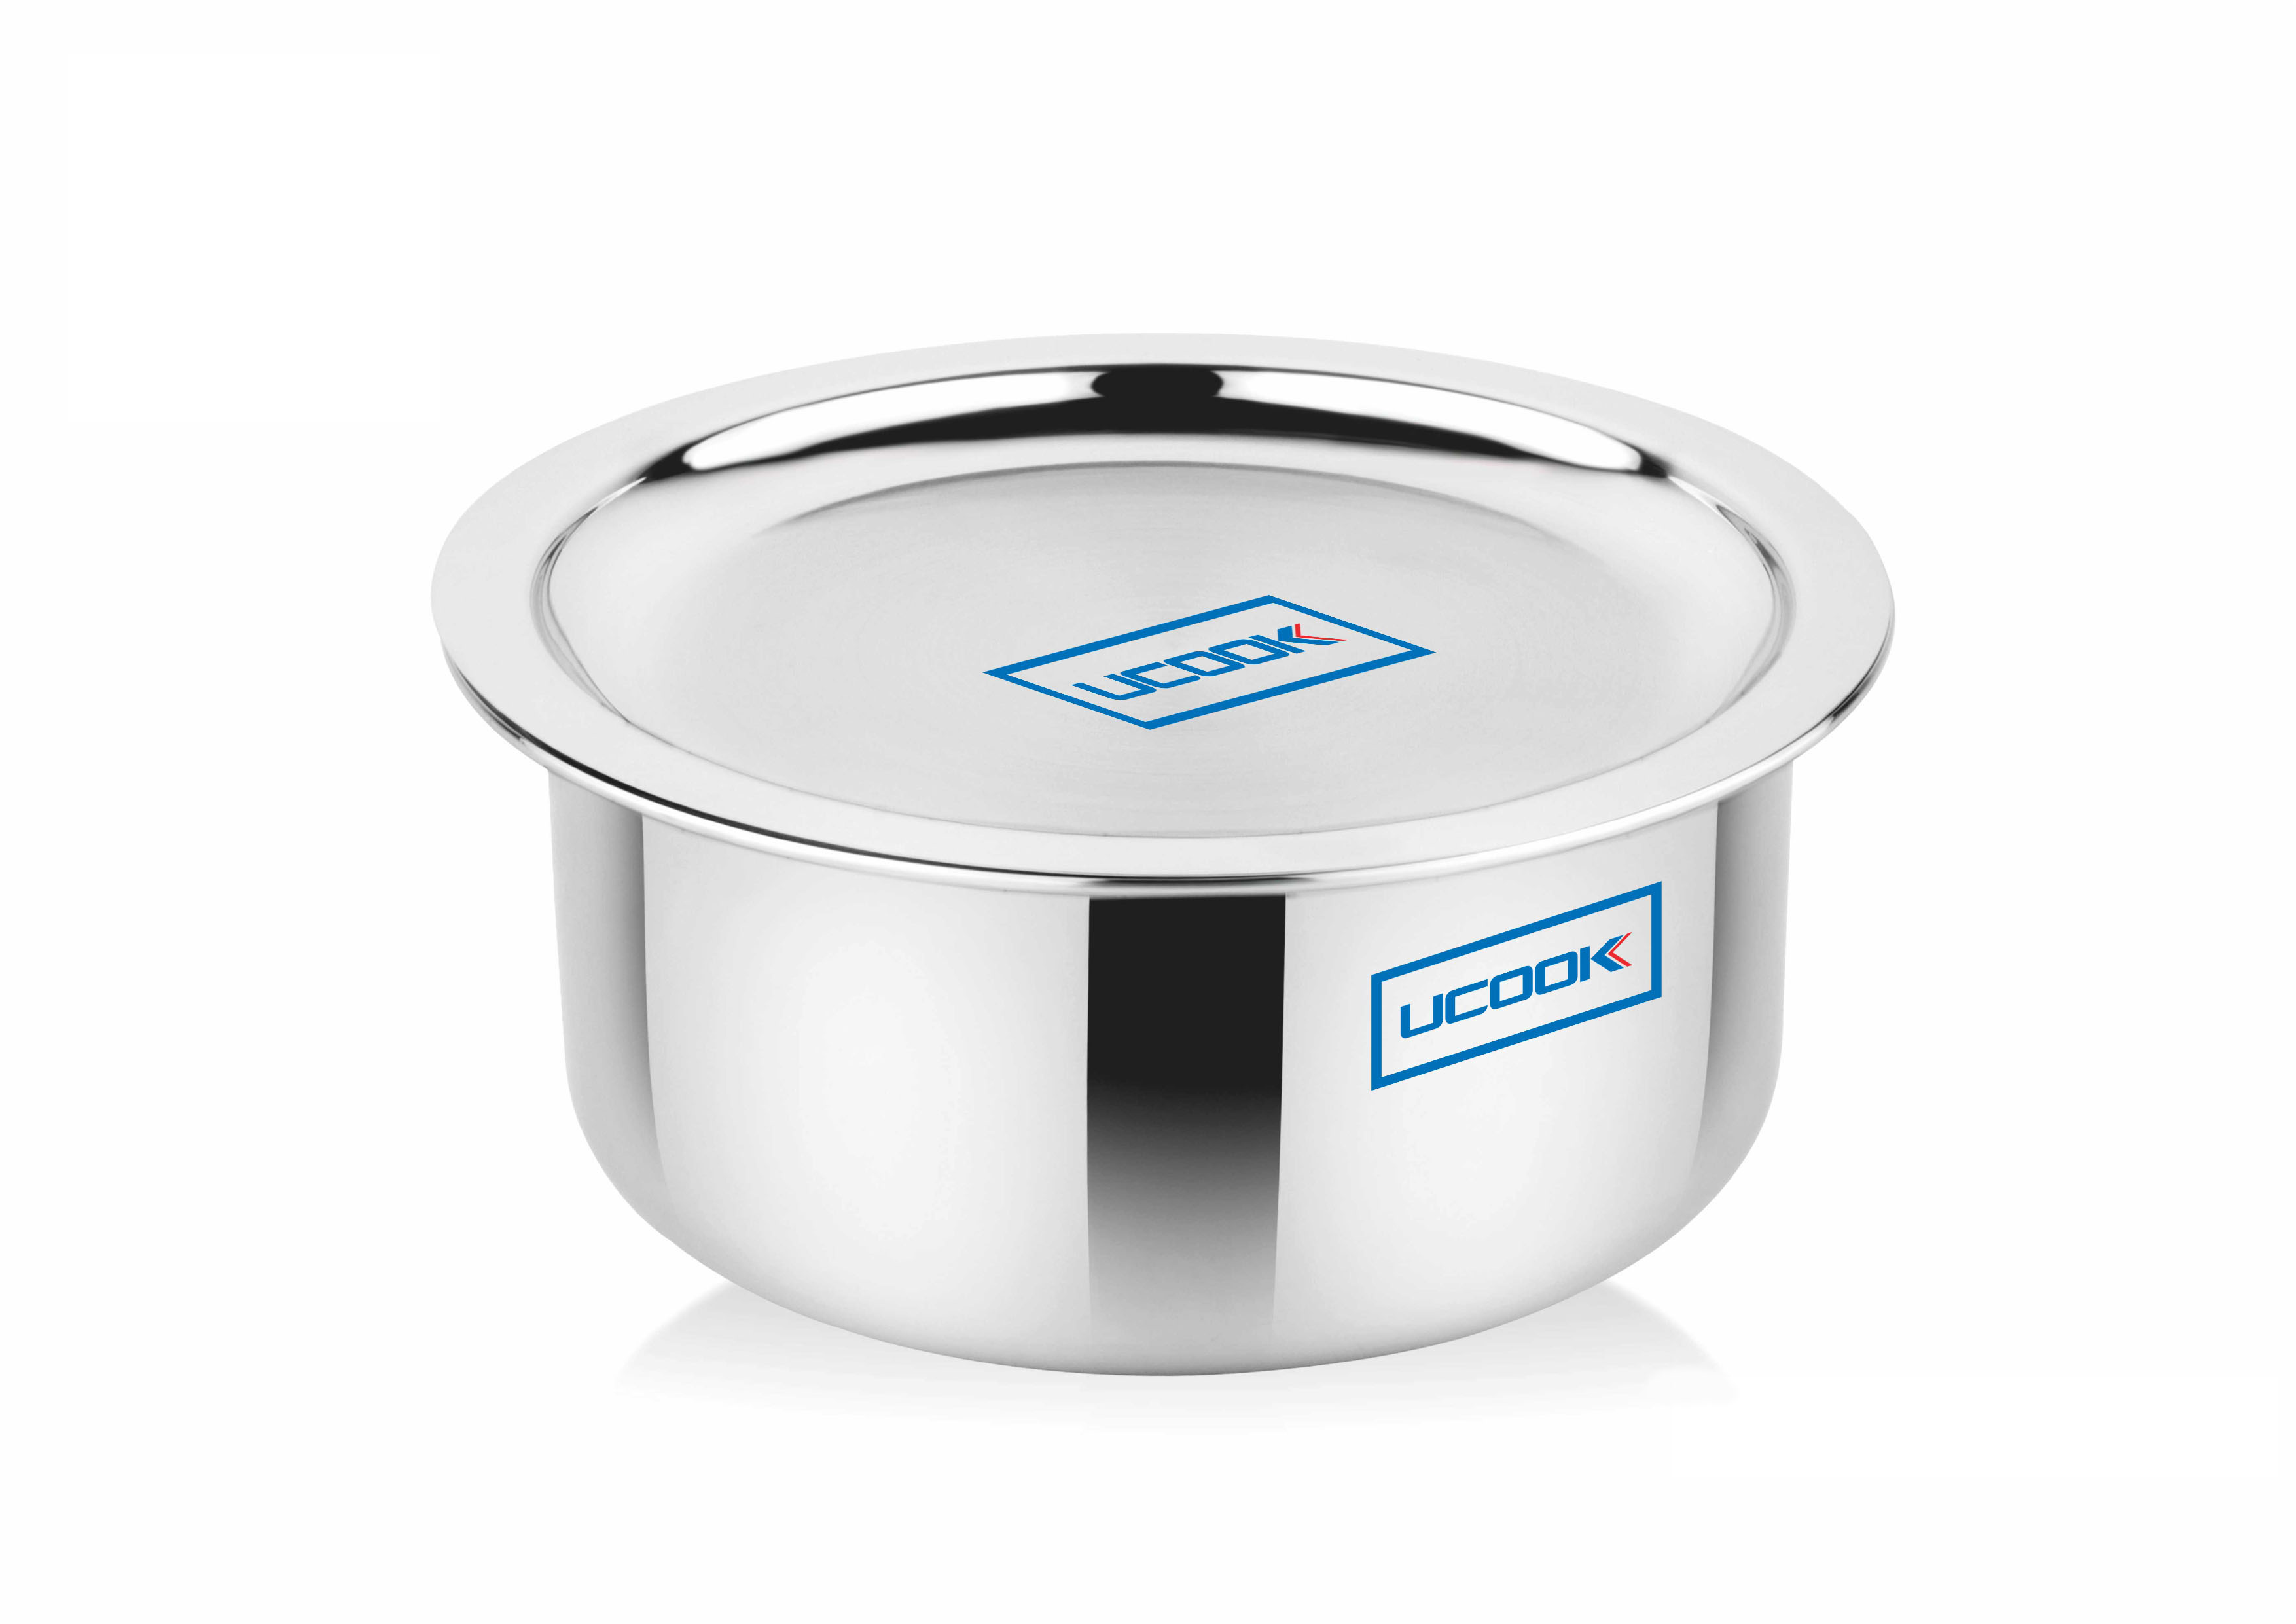 Cookware Premium- UCOOK SS Triply Tope induction compatible with Lid 200 mm / 3.25 Litre